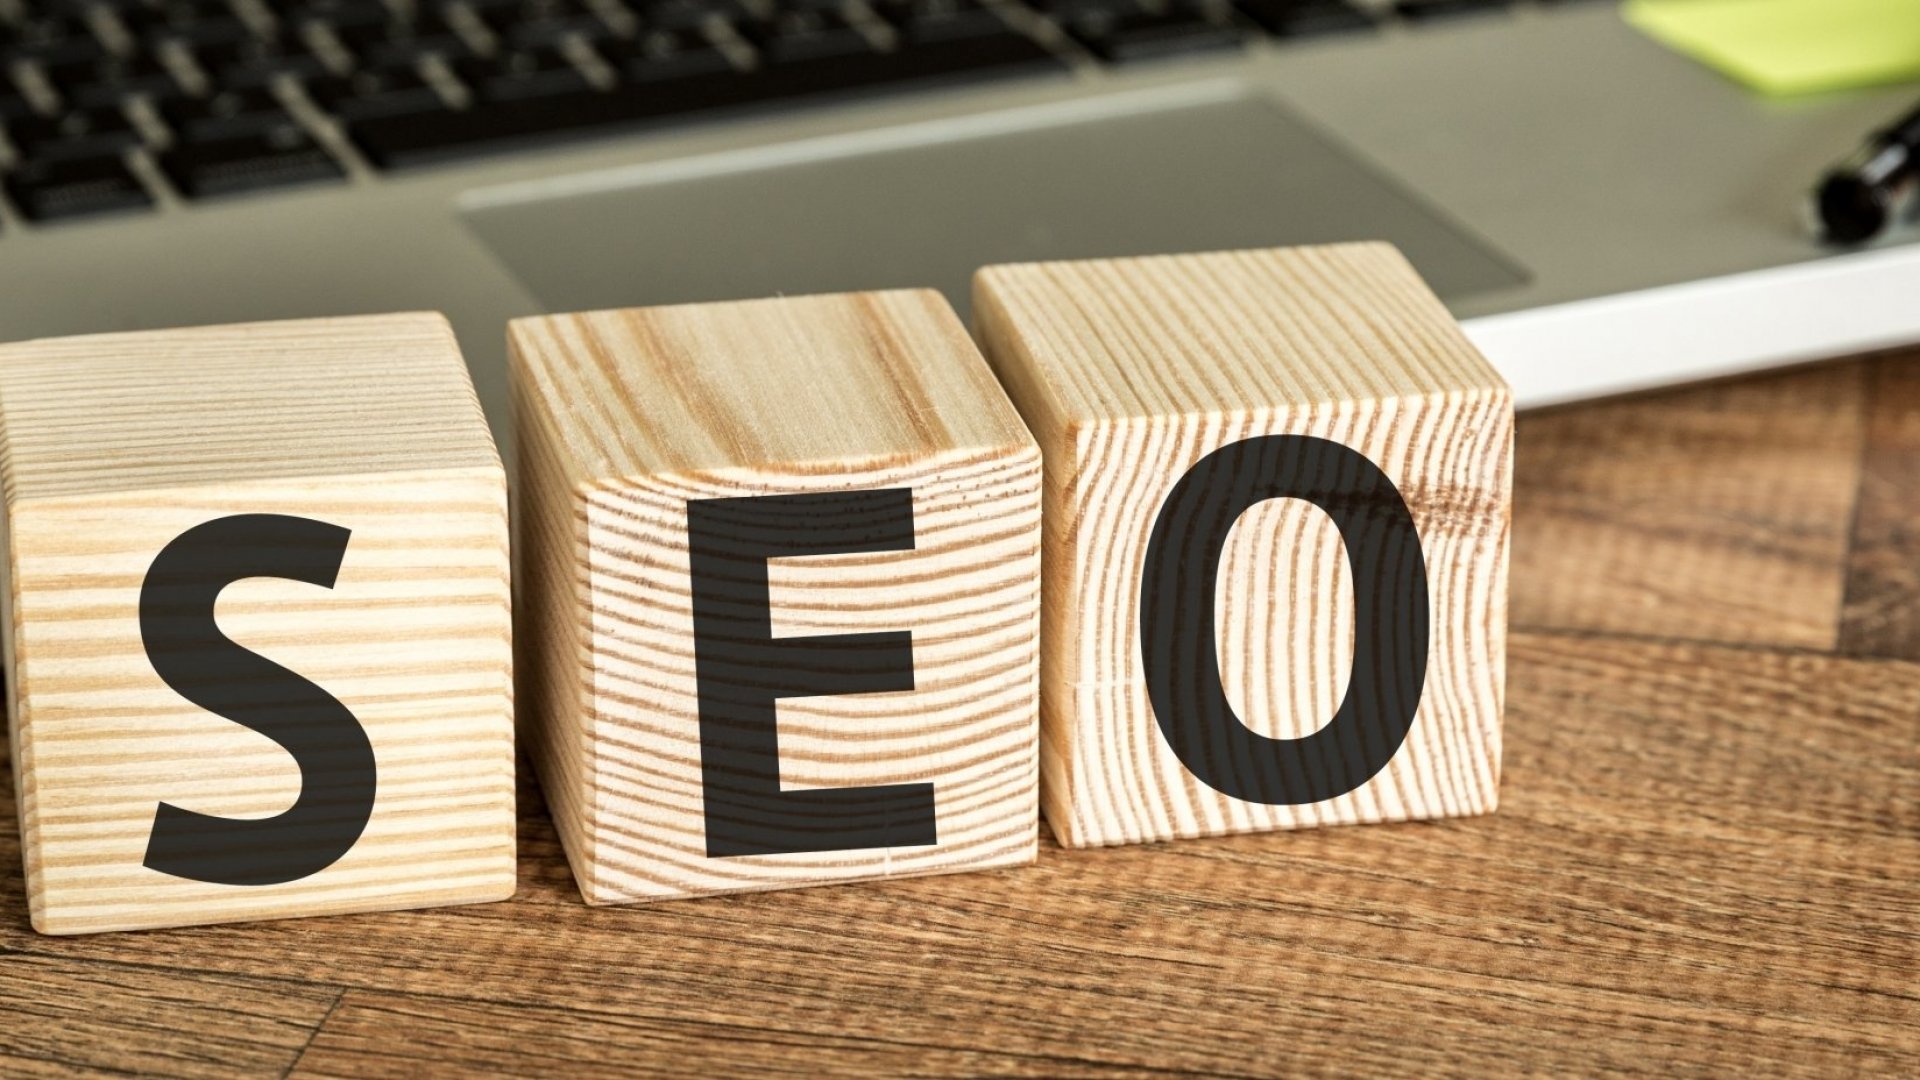 Why Does SEO Play A Major Role In Digital Marketing?